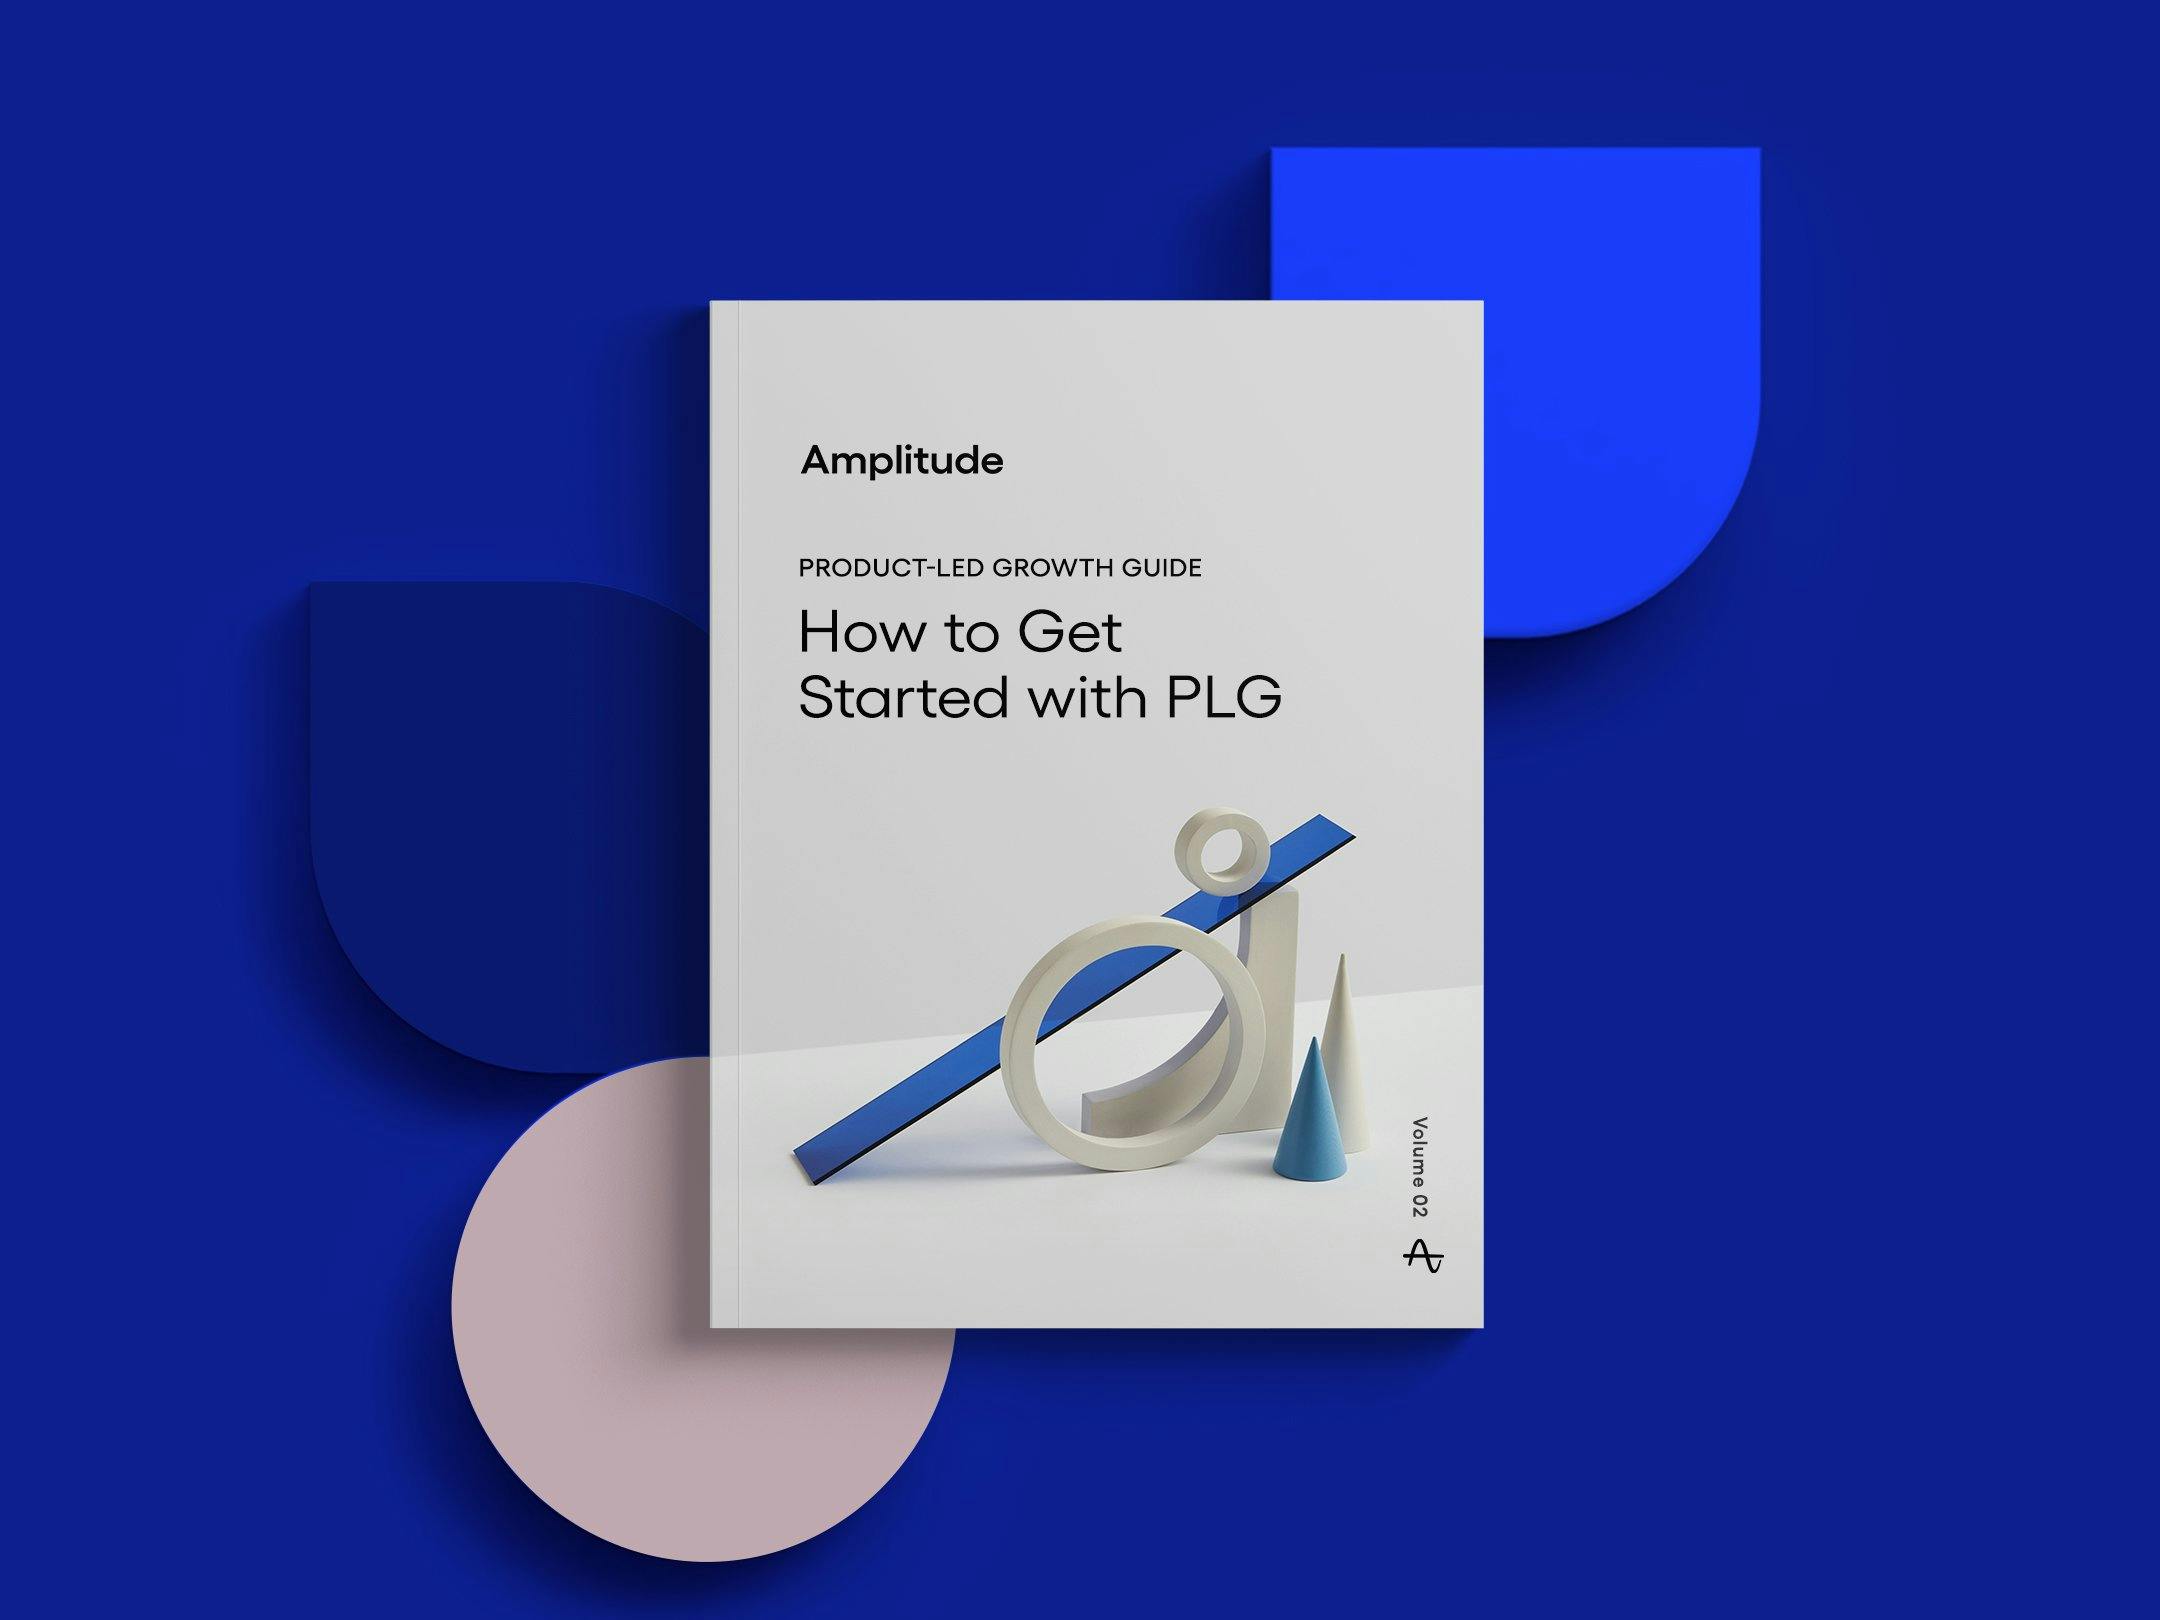 Product-Led Growth Guide Volume 2: How to Get Started